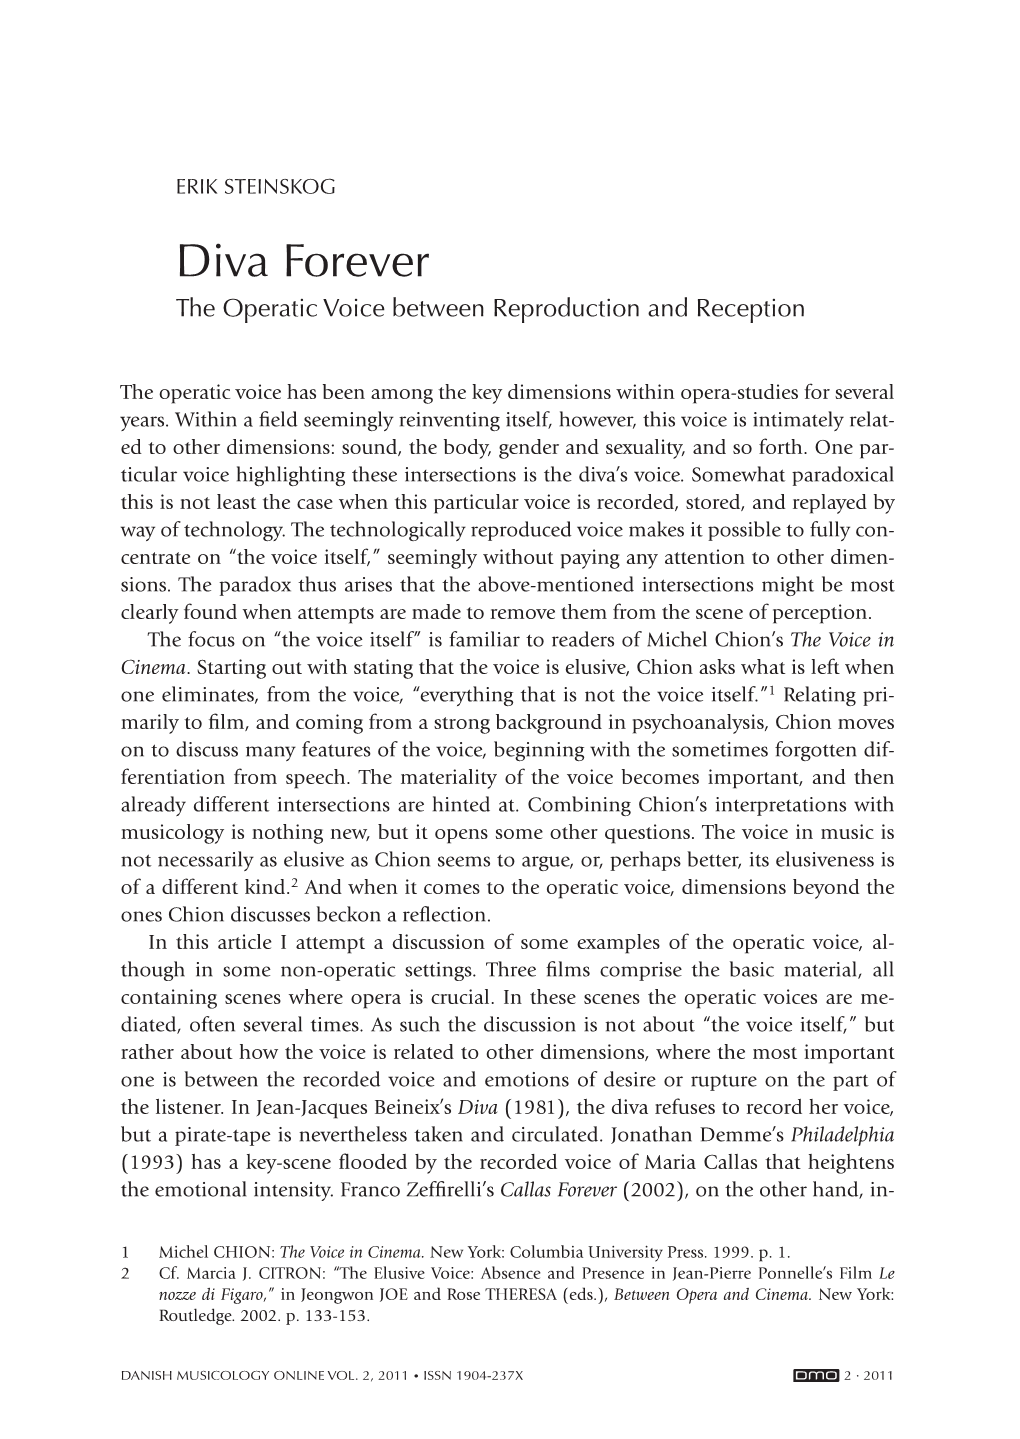 Diva Forever the Operatic Voice Between Reproduction and Reception